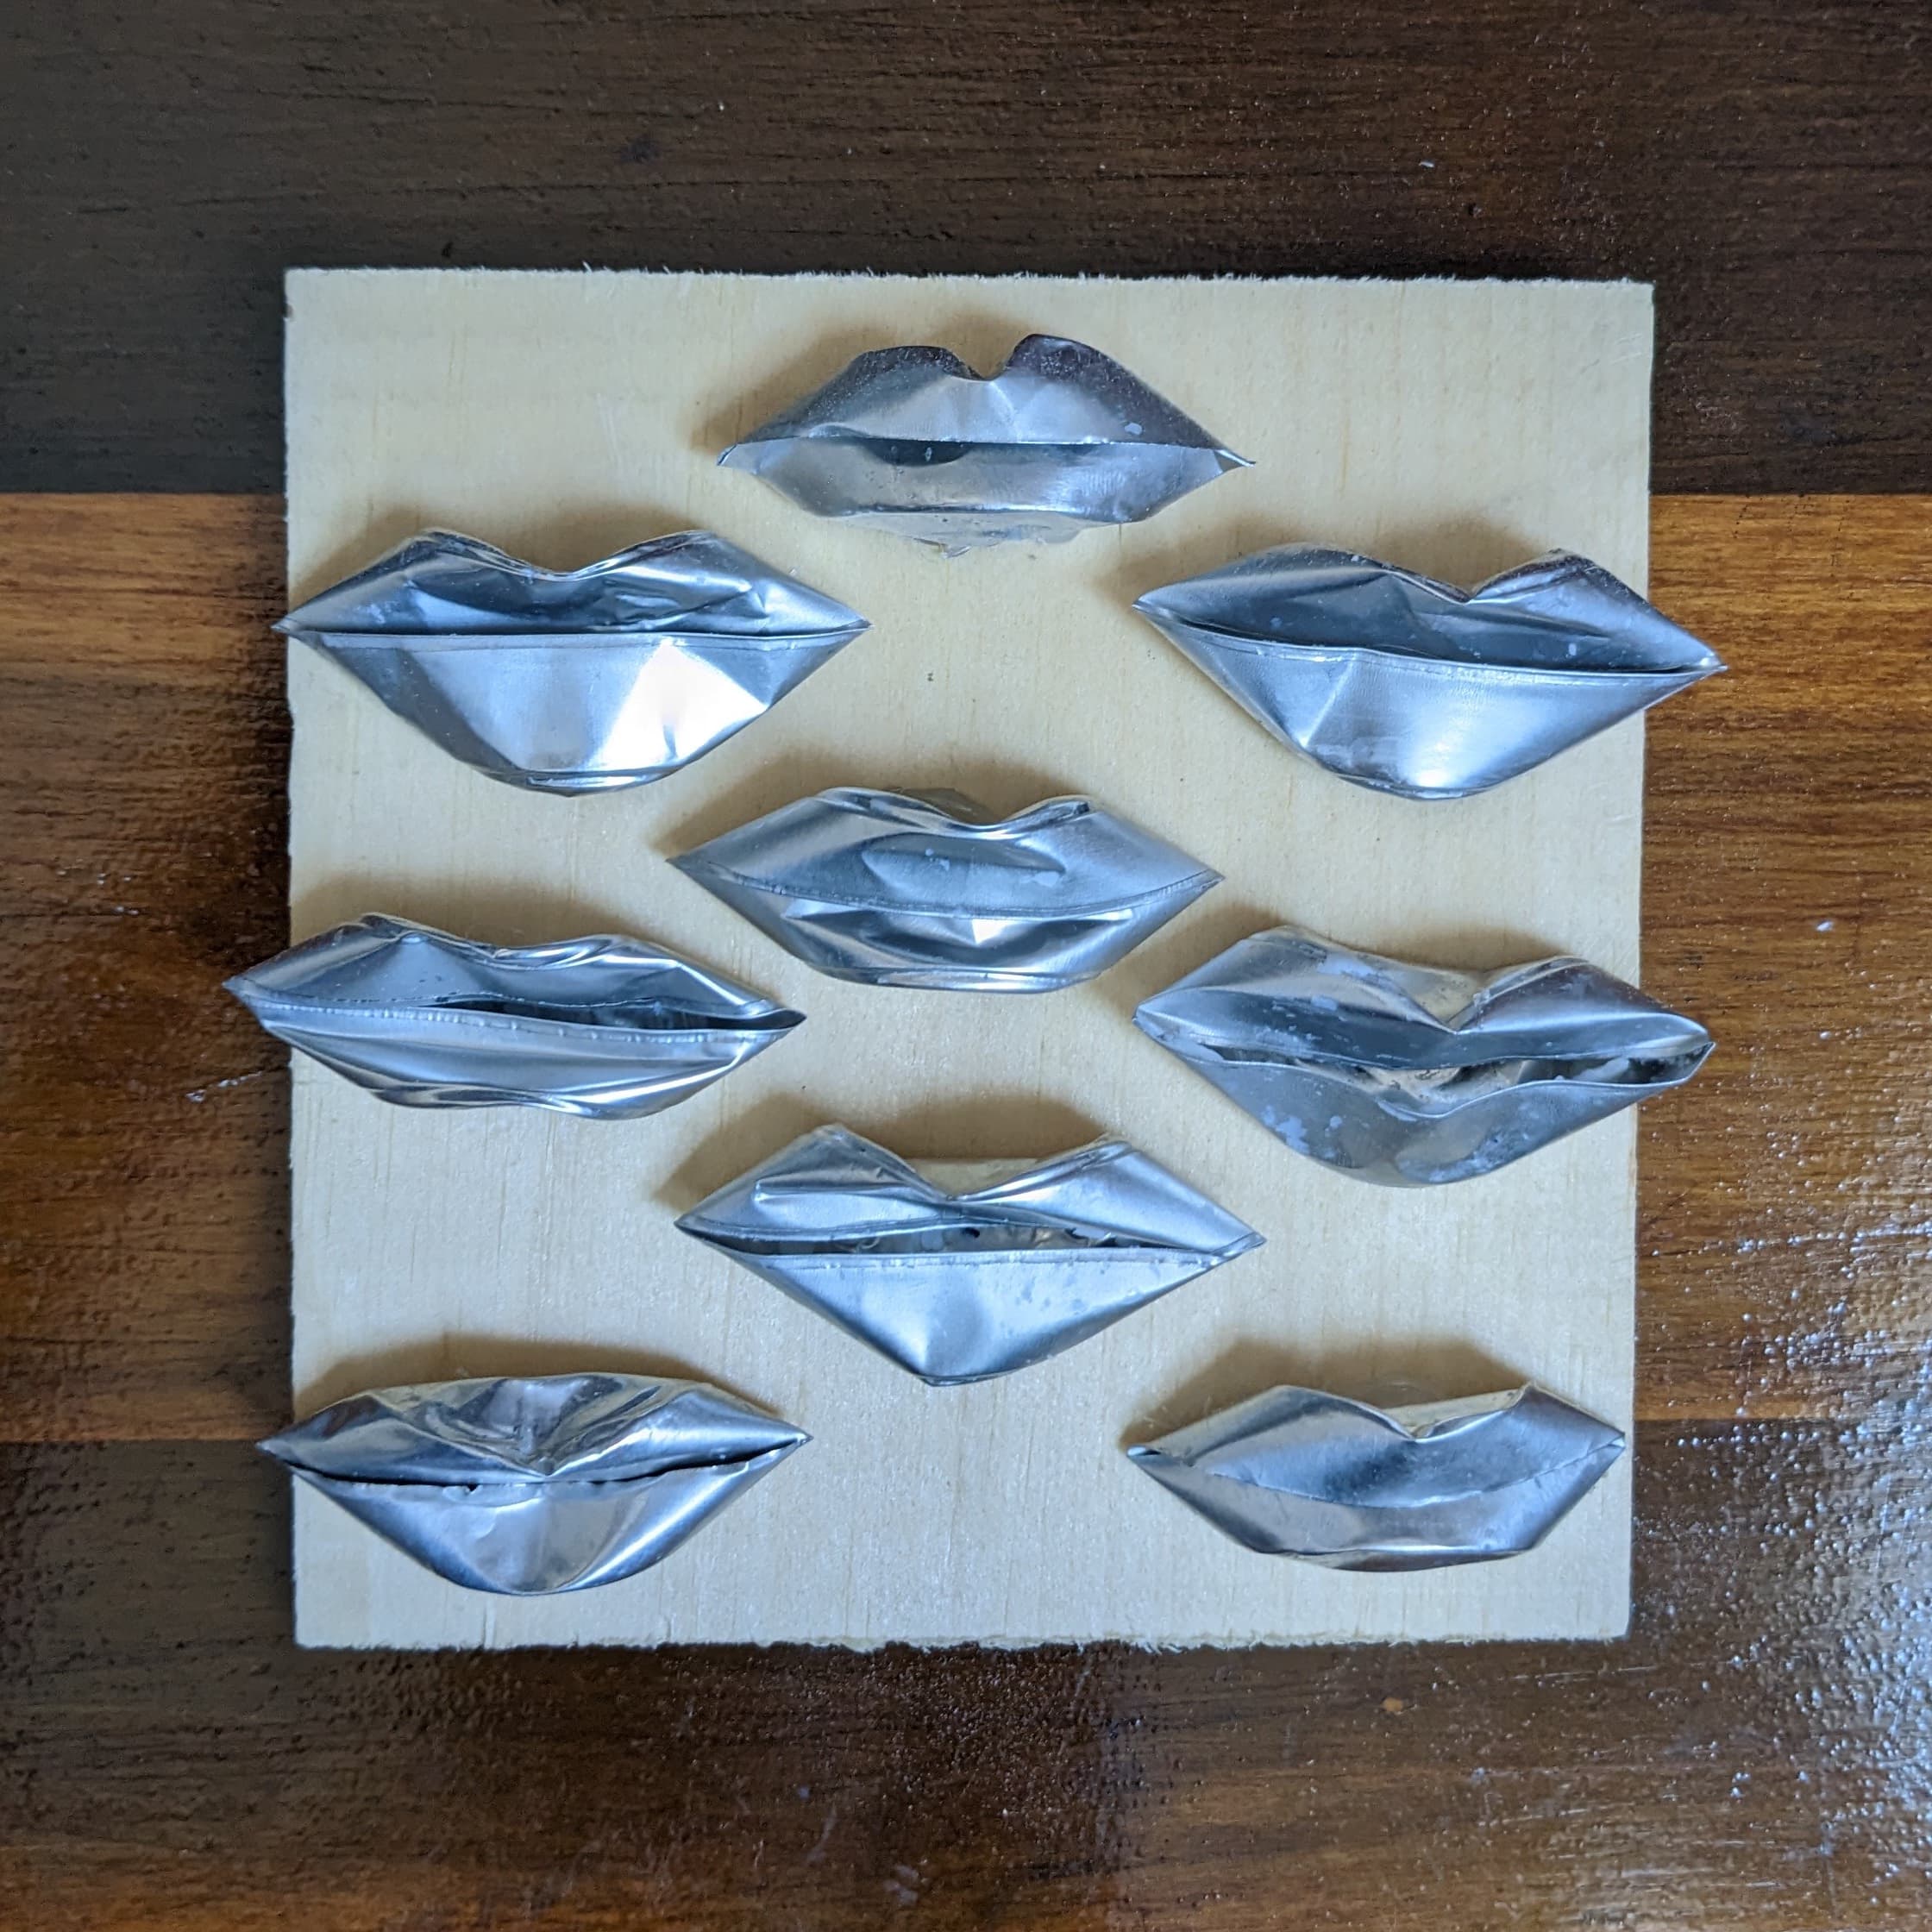 Repurposed tea light candle holders shaped like lips, adhered to a wooden base.